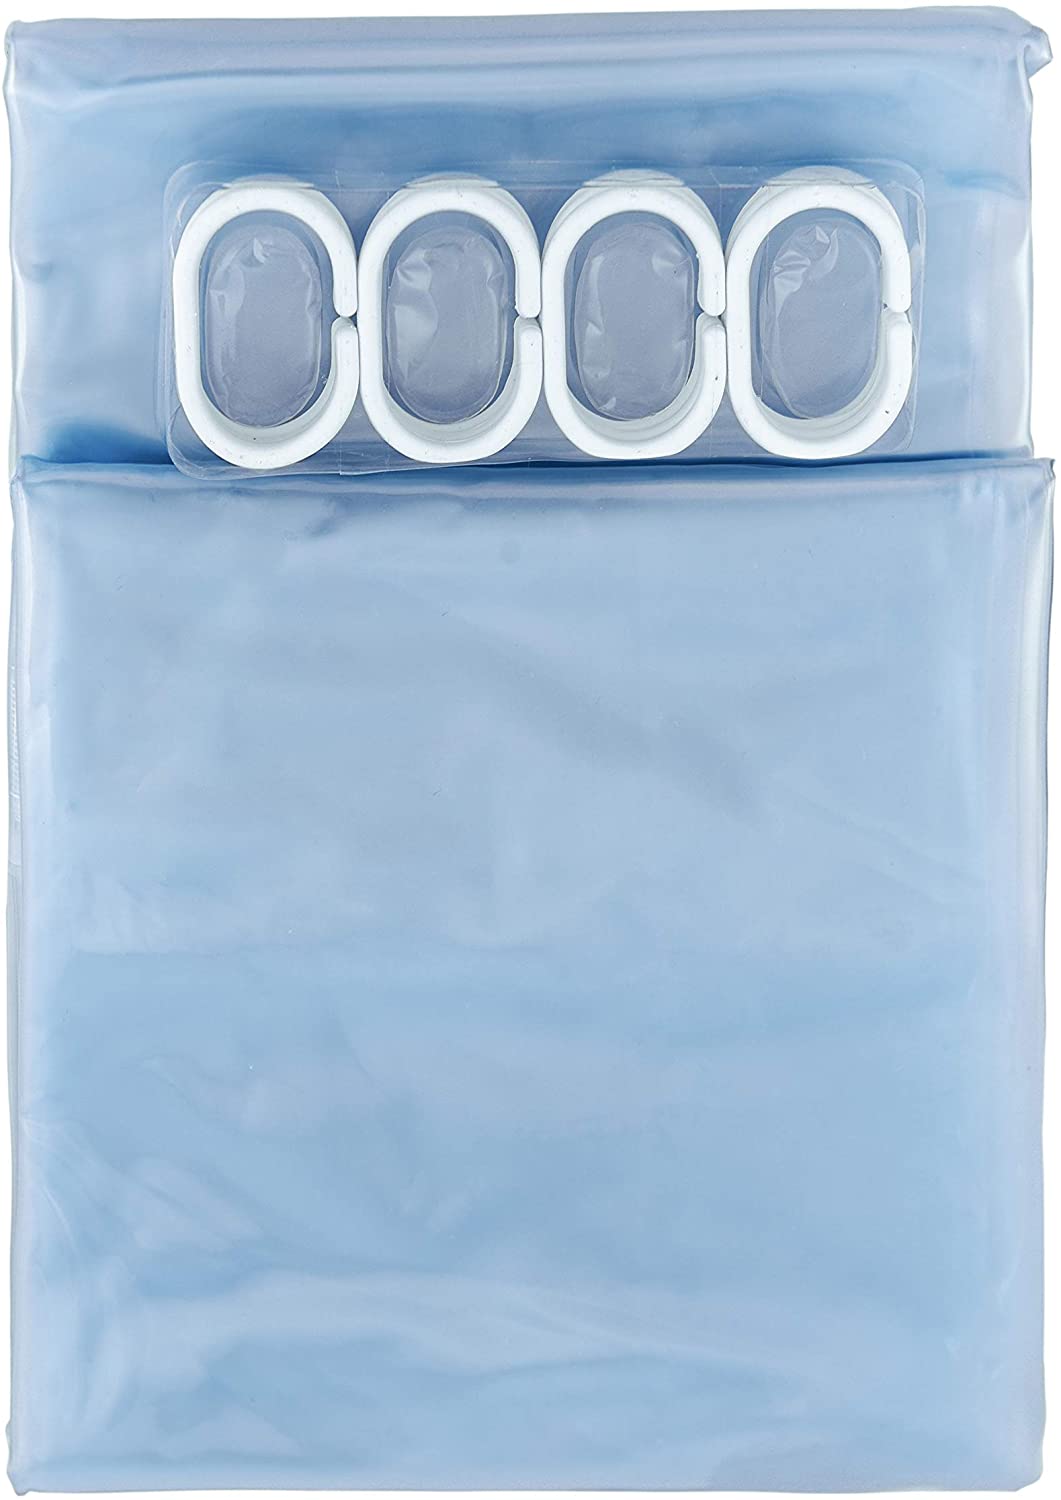 Vinyl Bathroom Shower Curtain Liner with Metal Grommets and Plastic Hooks - 72" x 72", Clear